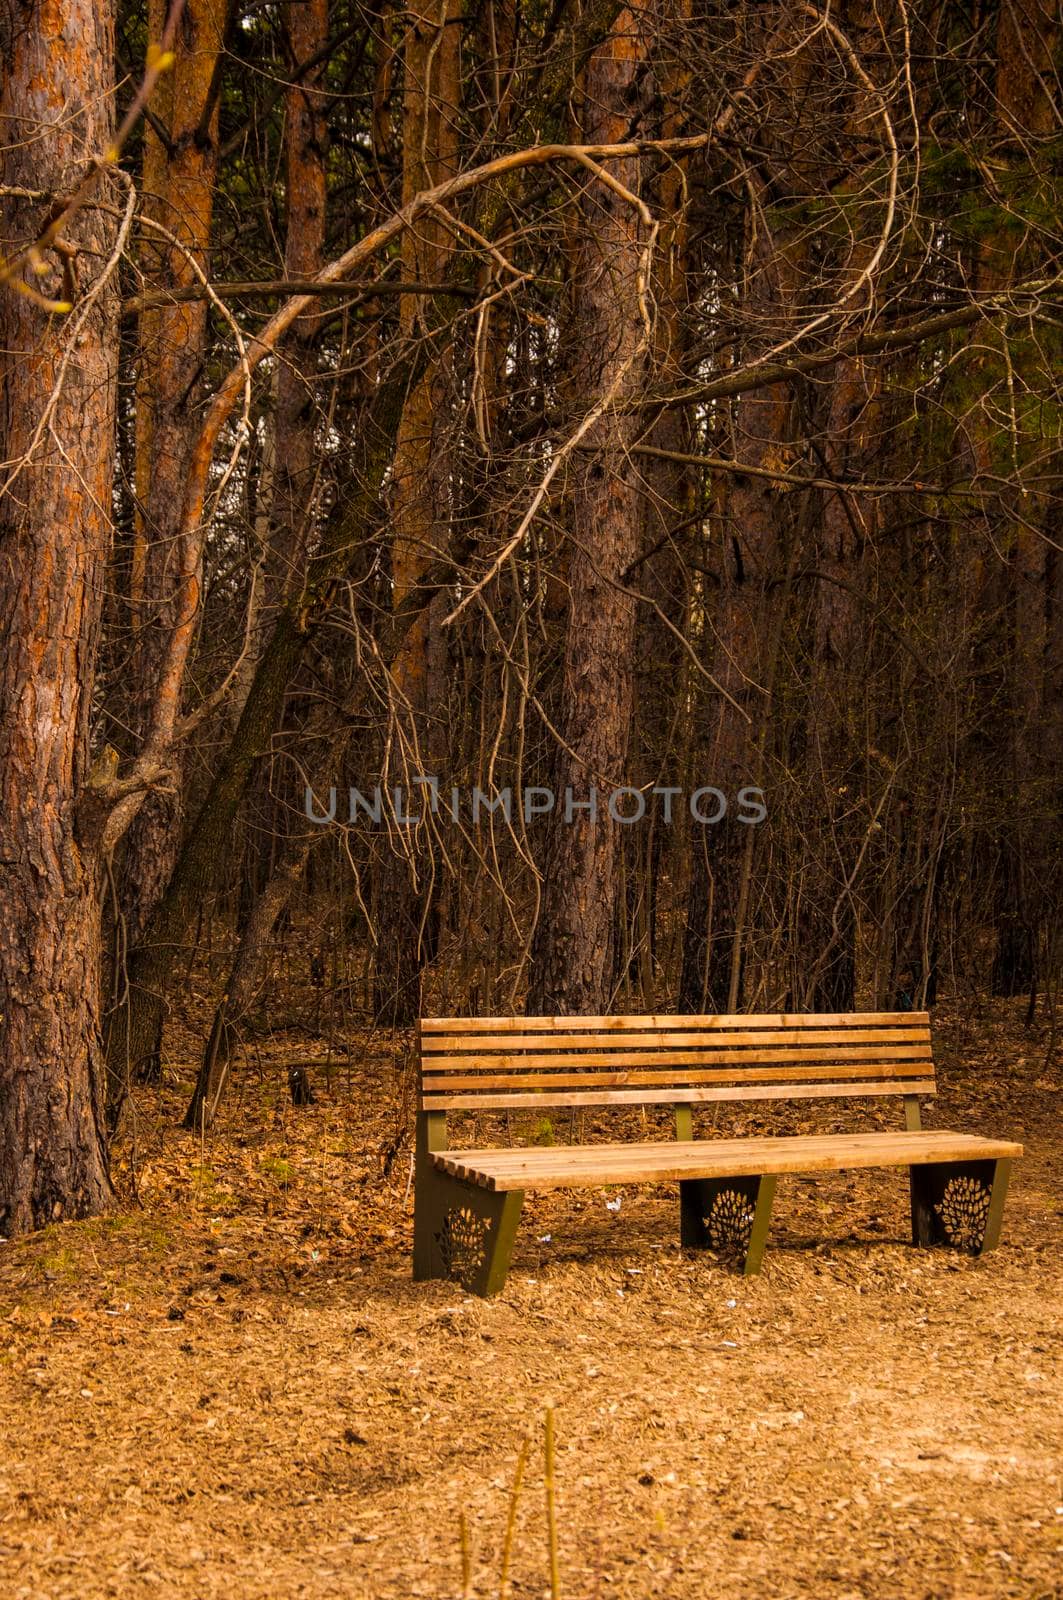 Wooden bench in the city park by inxti